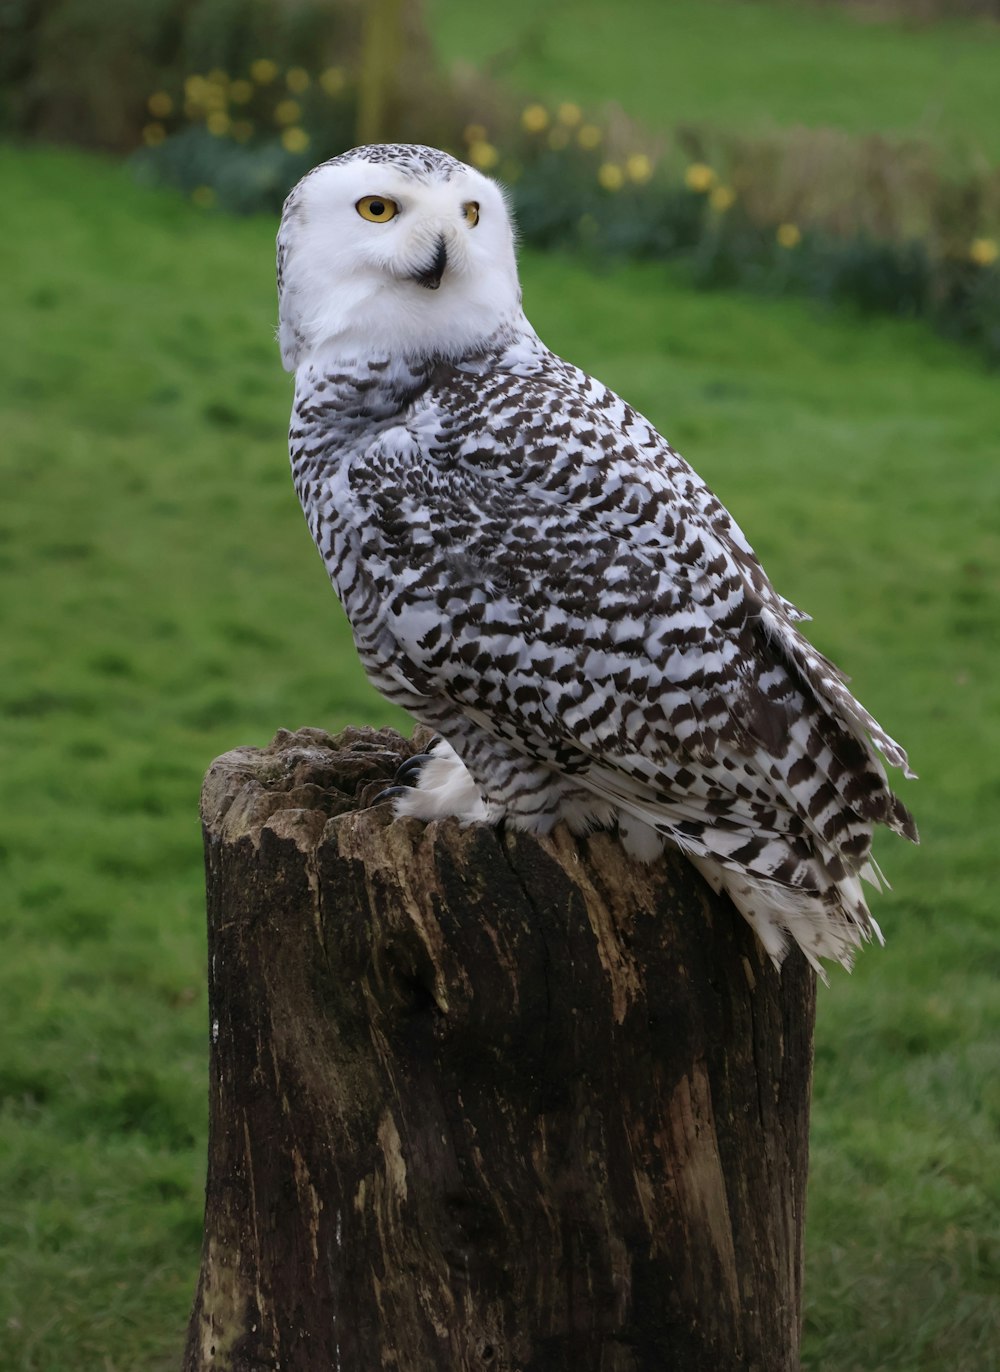 a white and black owl sitting on top of a tree stump